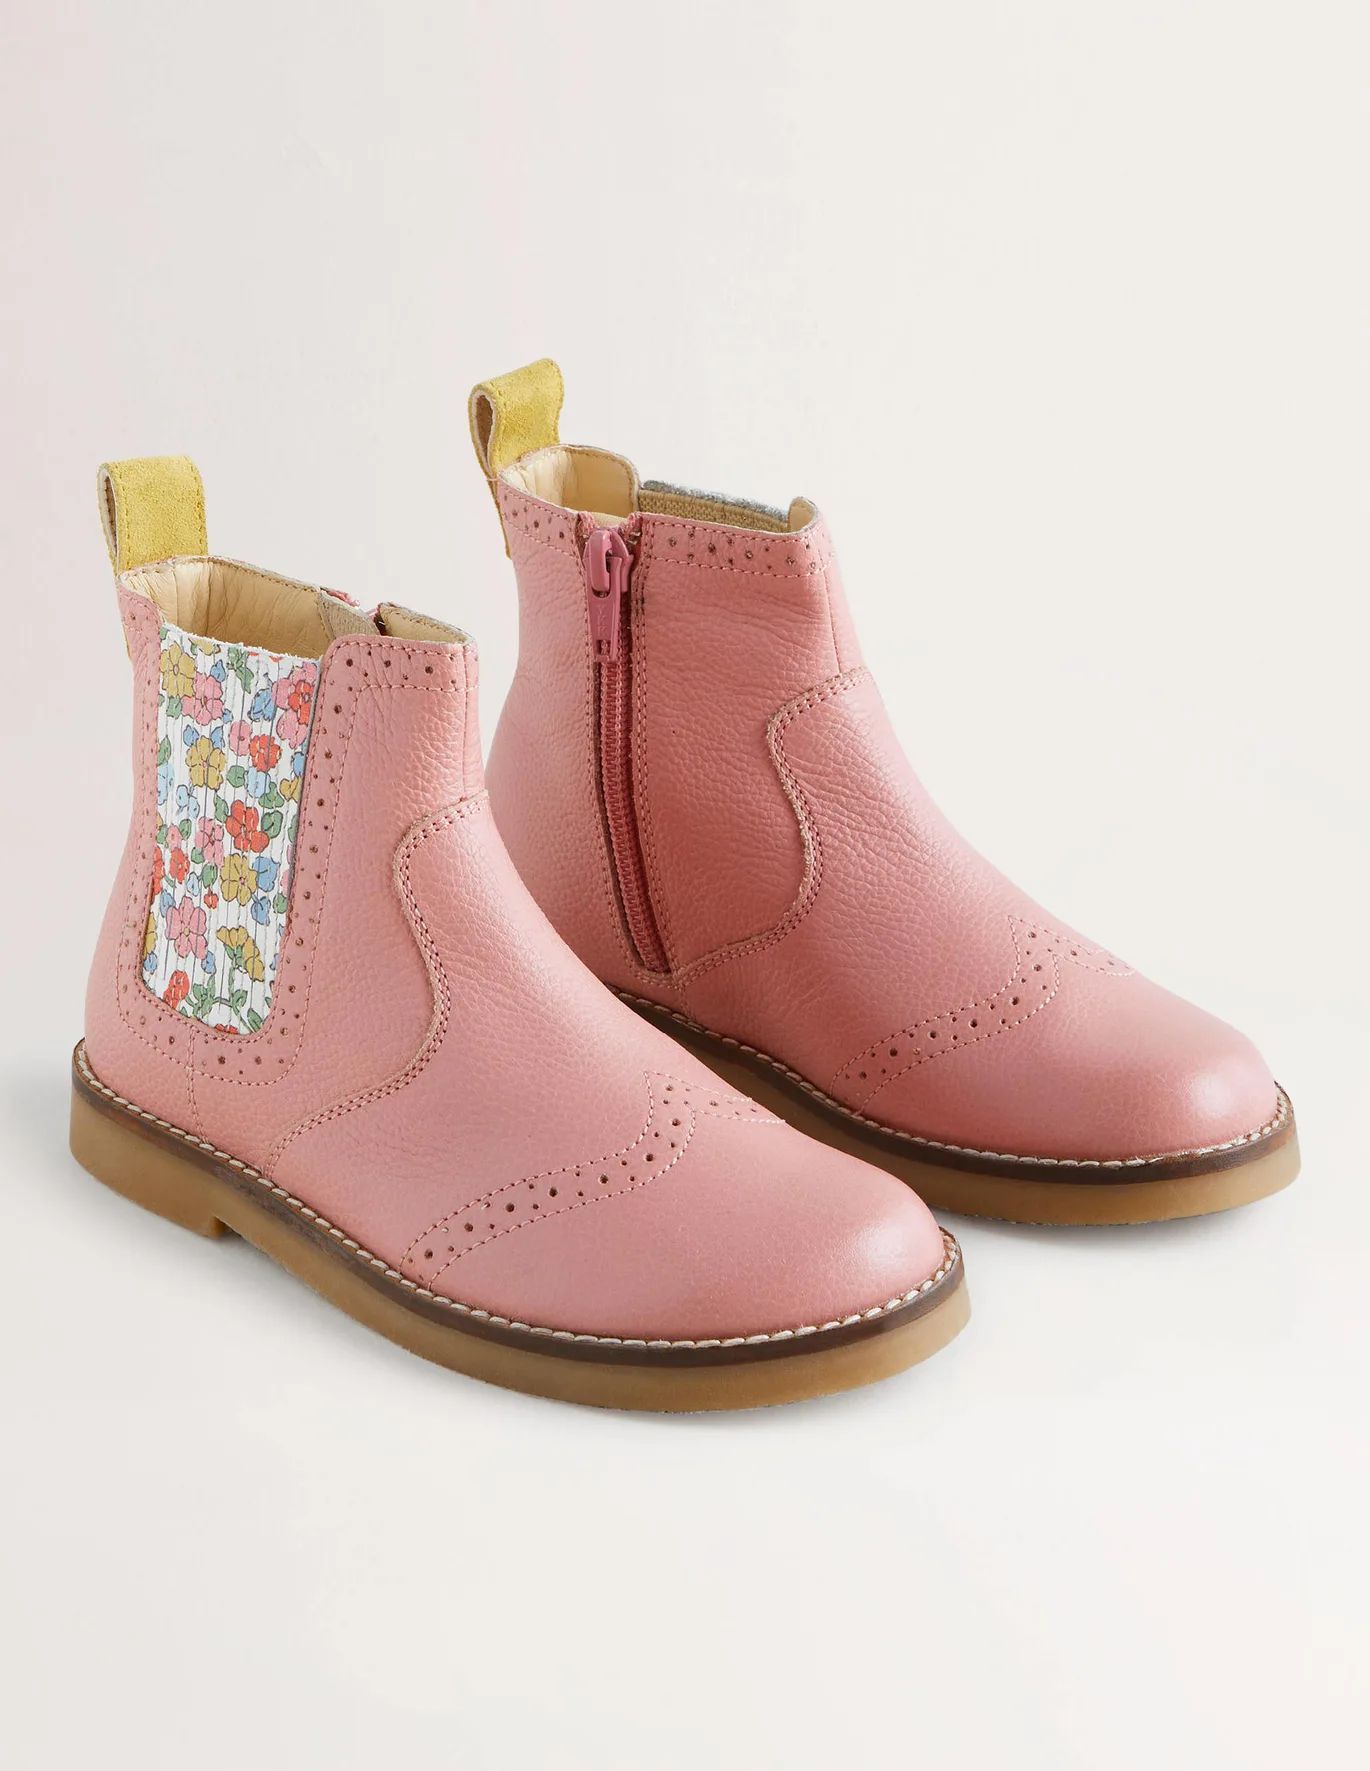 Chelsea Boots (Girls) - Pink | Boden (US)